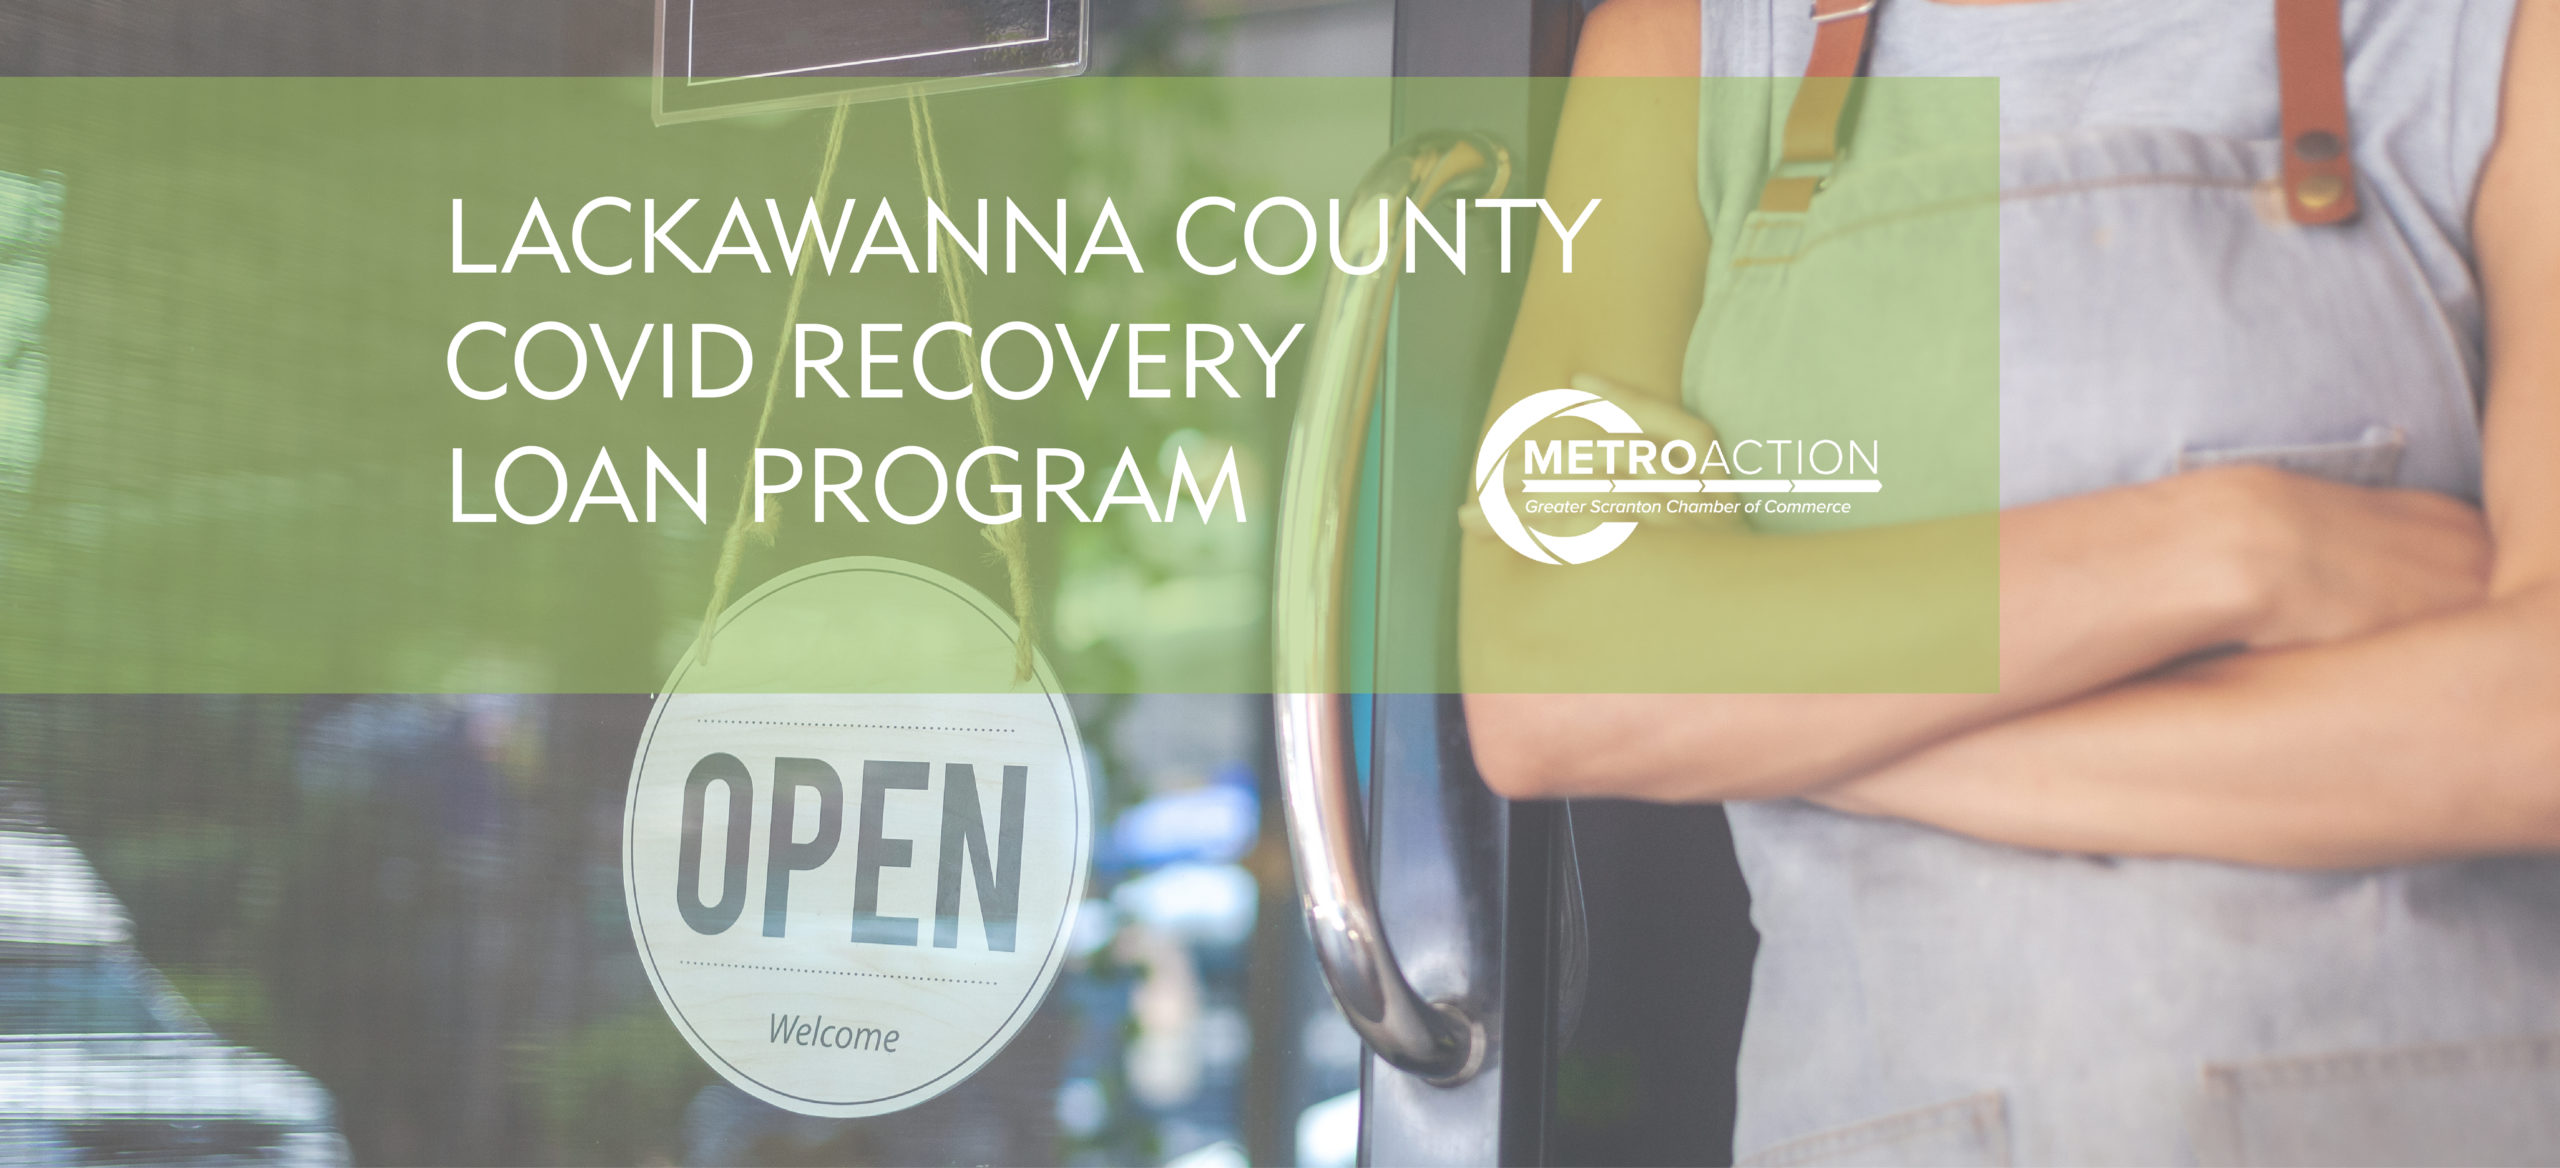 MetroAction Launches COVID Recovery Loan Program